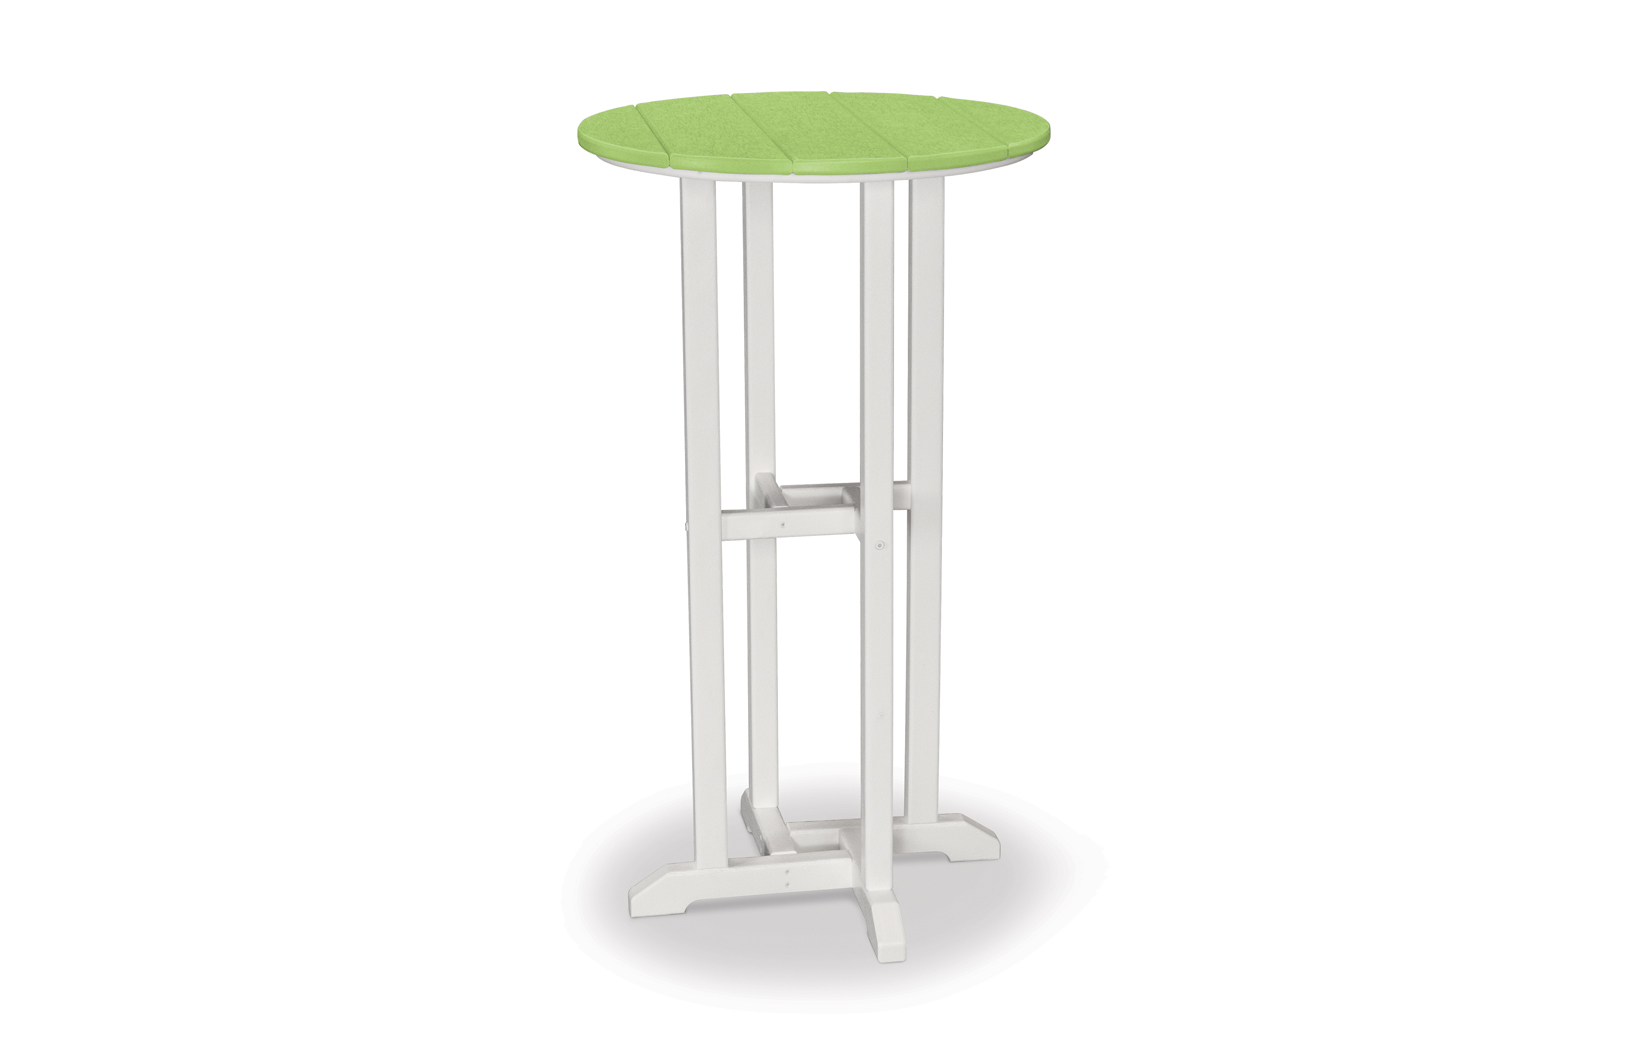 Texawood Breeze Collection Contempo Bar Table